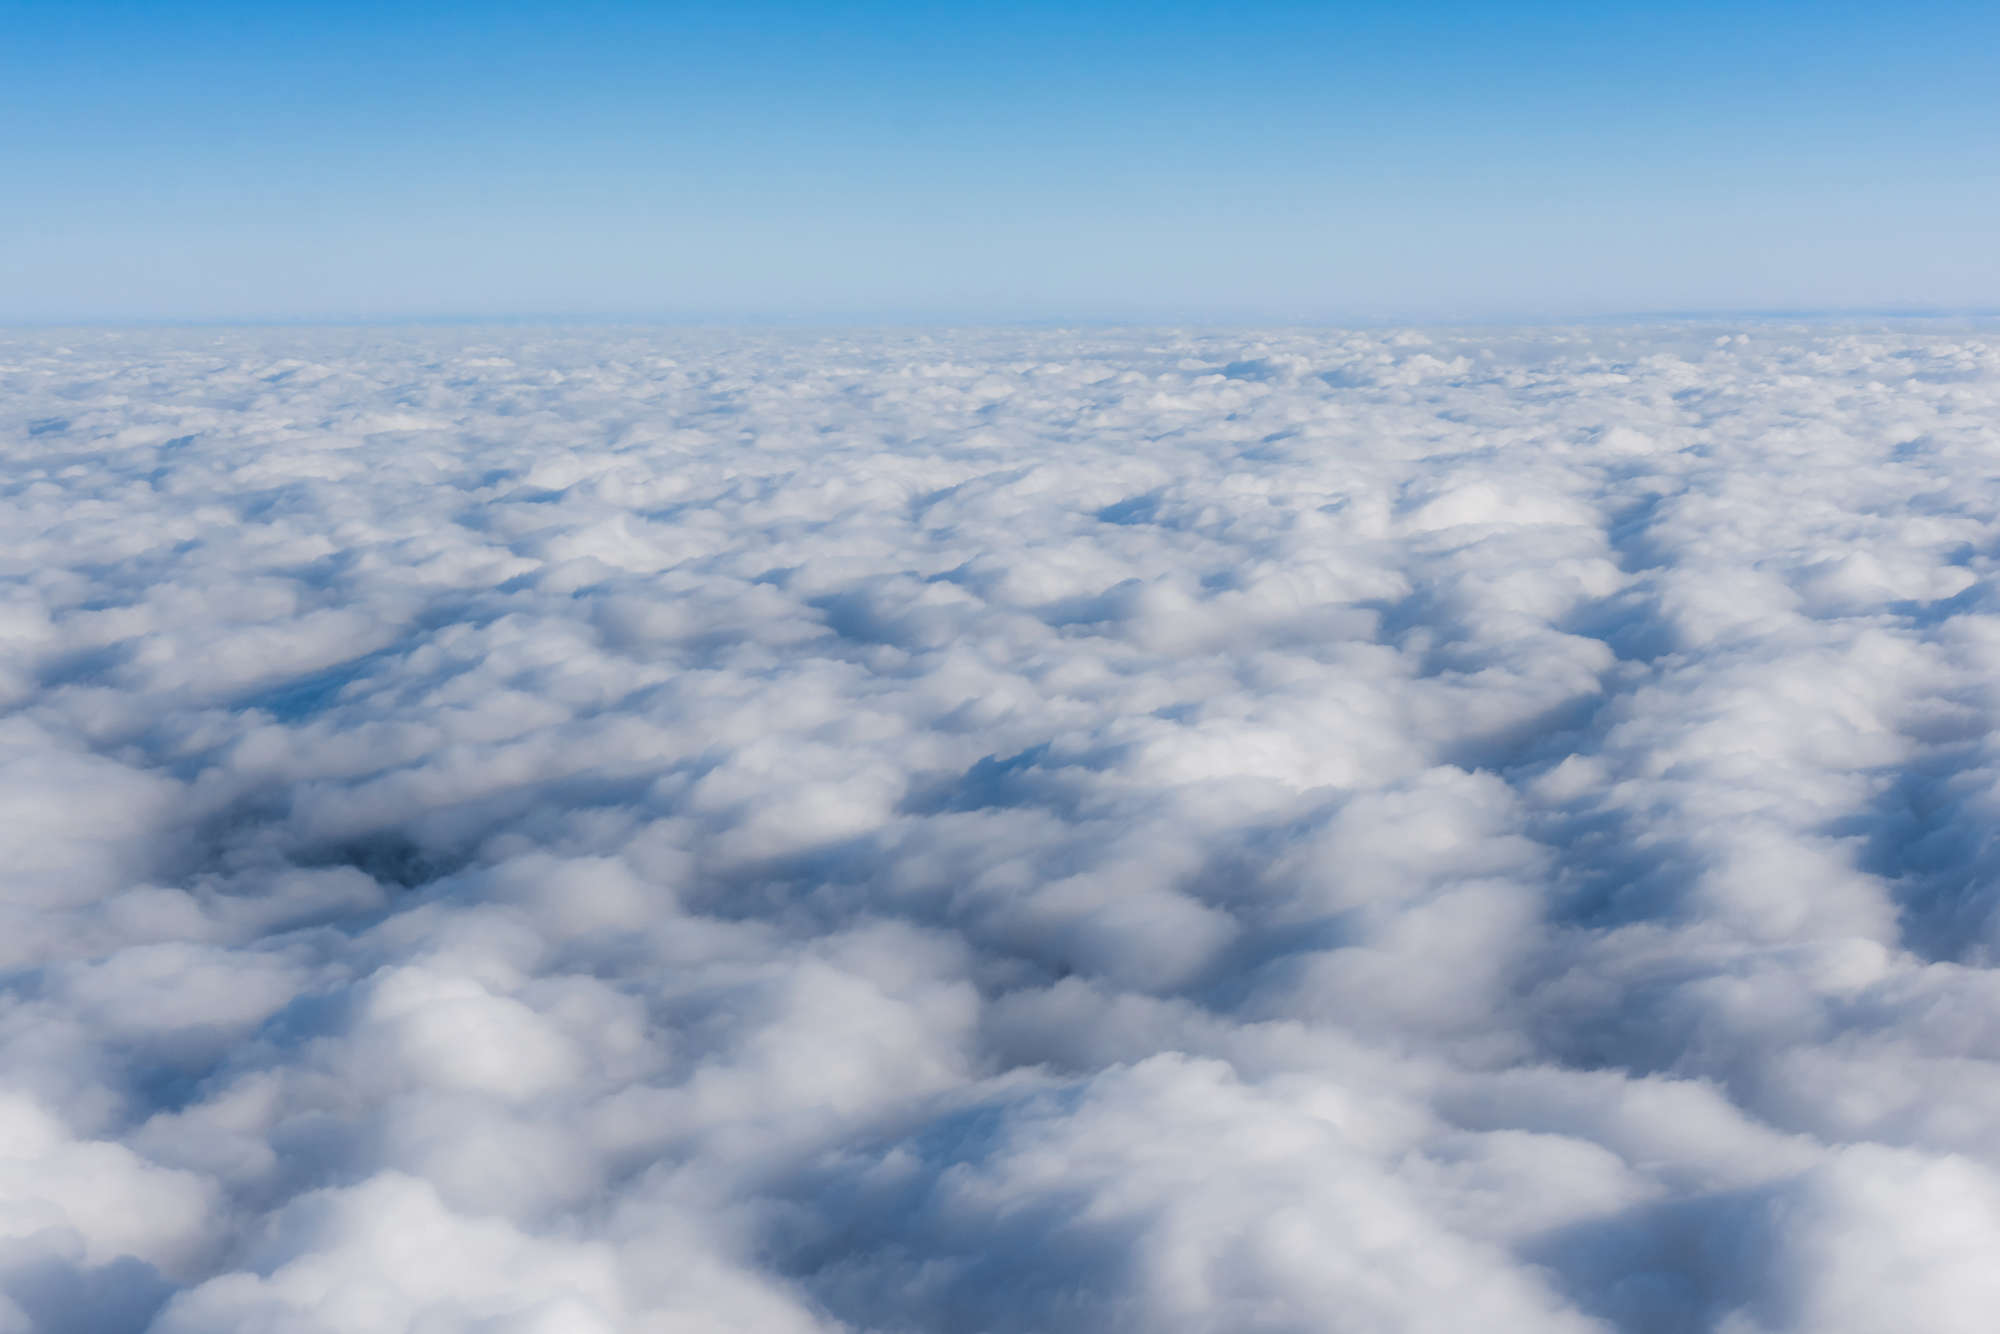             Nature photo wallpaper above the clouds on premium smooth non-woven
        